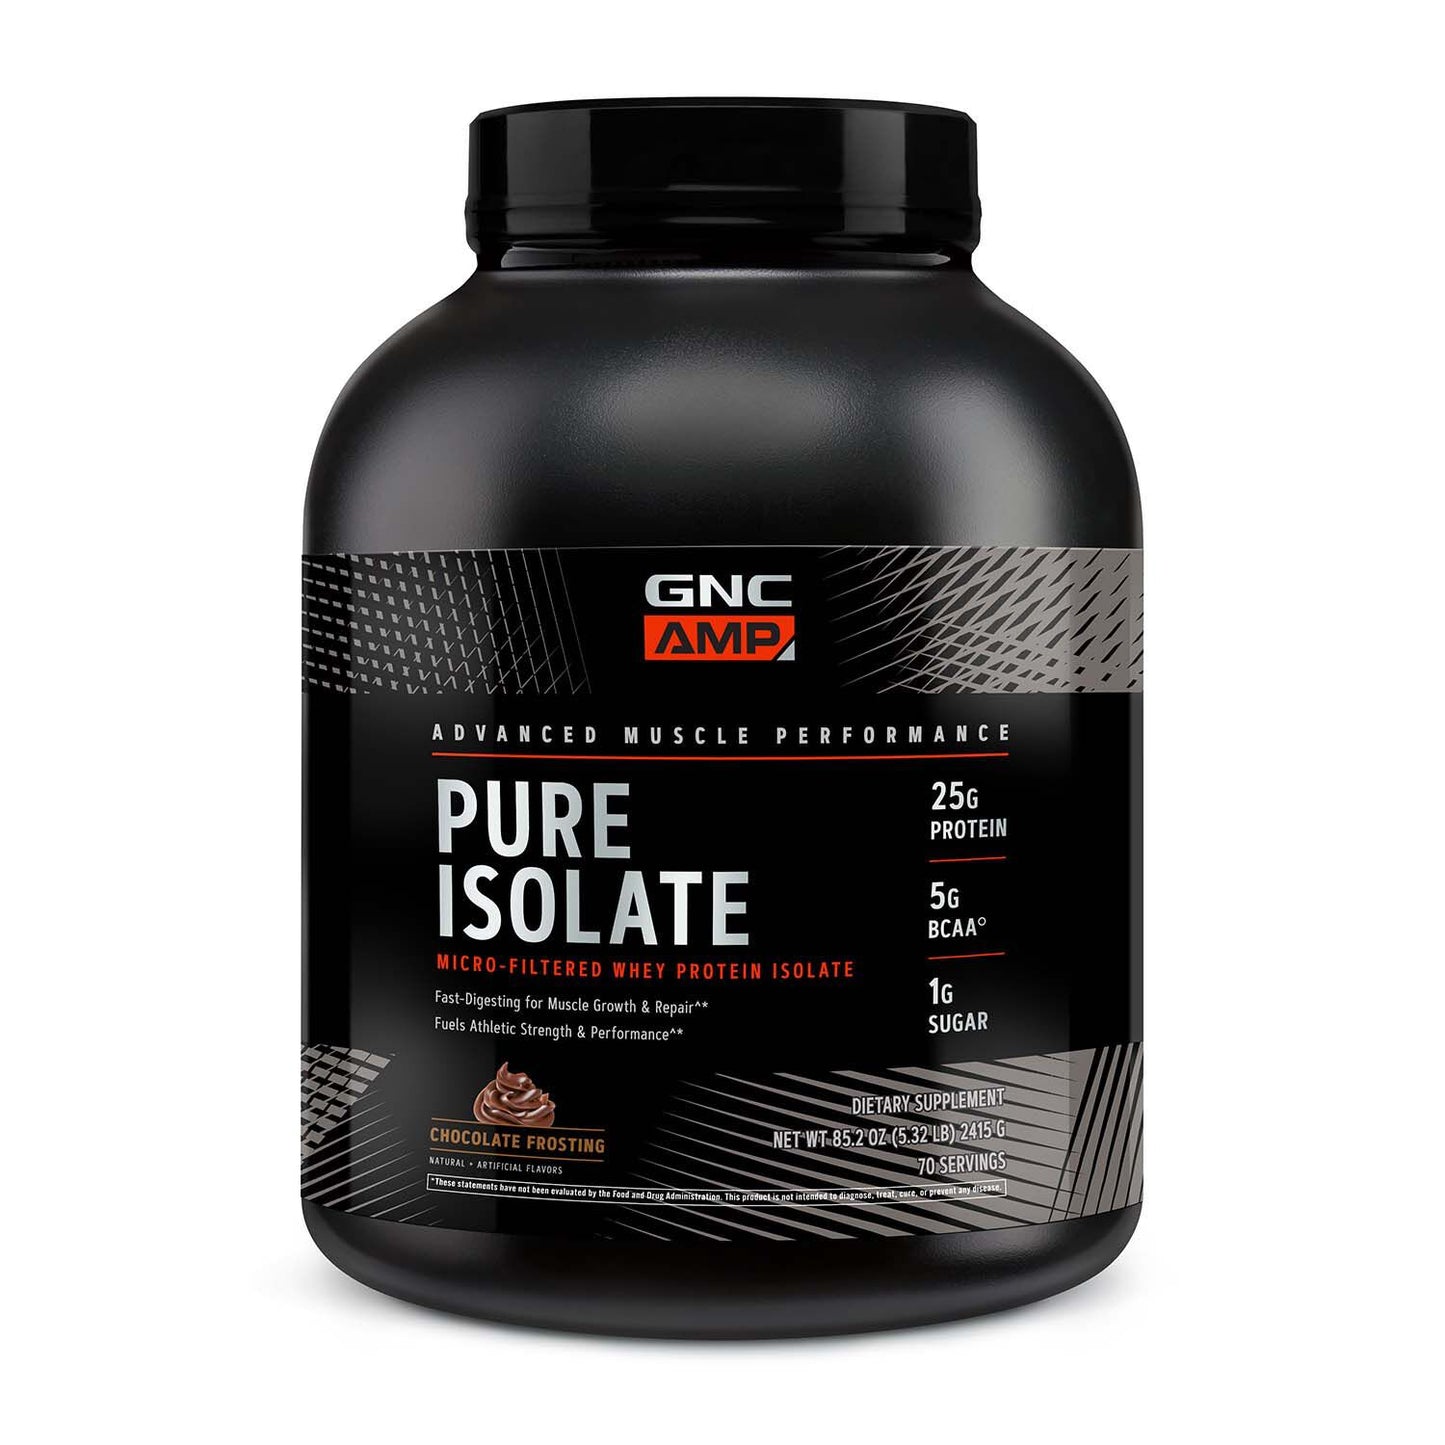 GNC AMP Pure Isolate Whey Protein 70 Servings